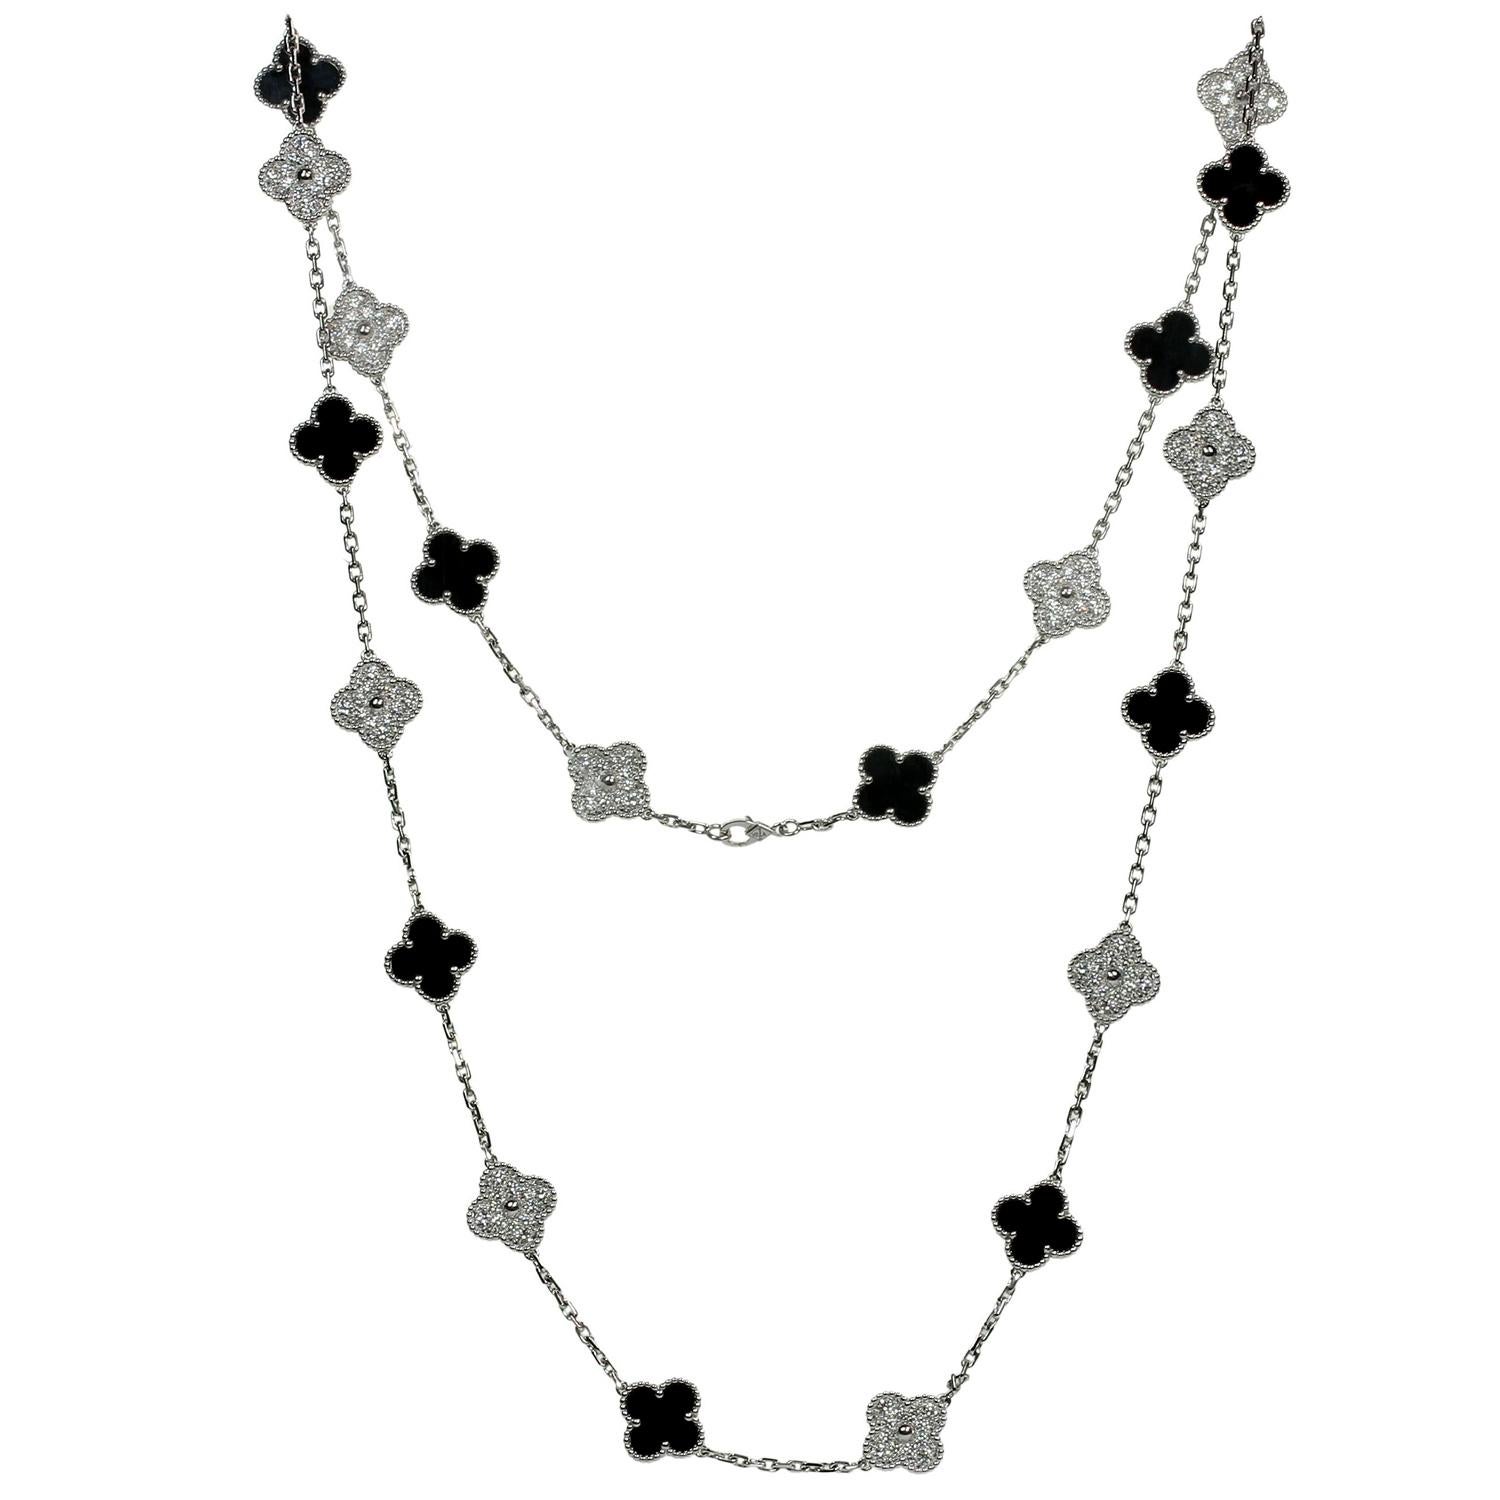 This exquisite long Van Cleef & Arpels necklace from the classic Alhambra collection features 20 lucky clover motifs crafted in 18k white gold, 10 are set with black onyx and 10 are pave-set with 120 round brilliant D-E-F VVS1-VVS2 diamonds weighing